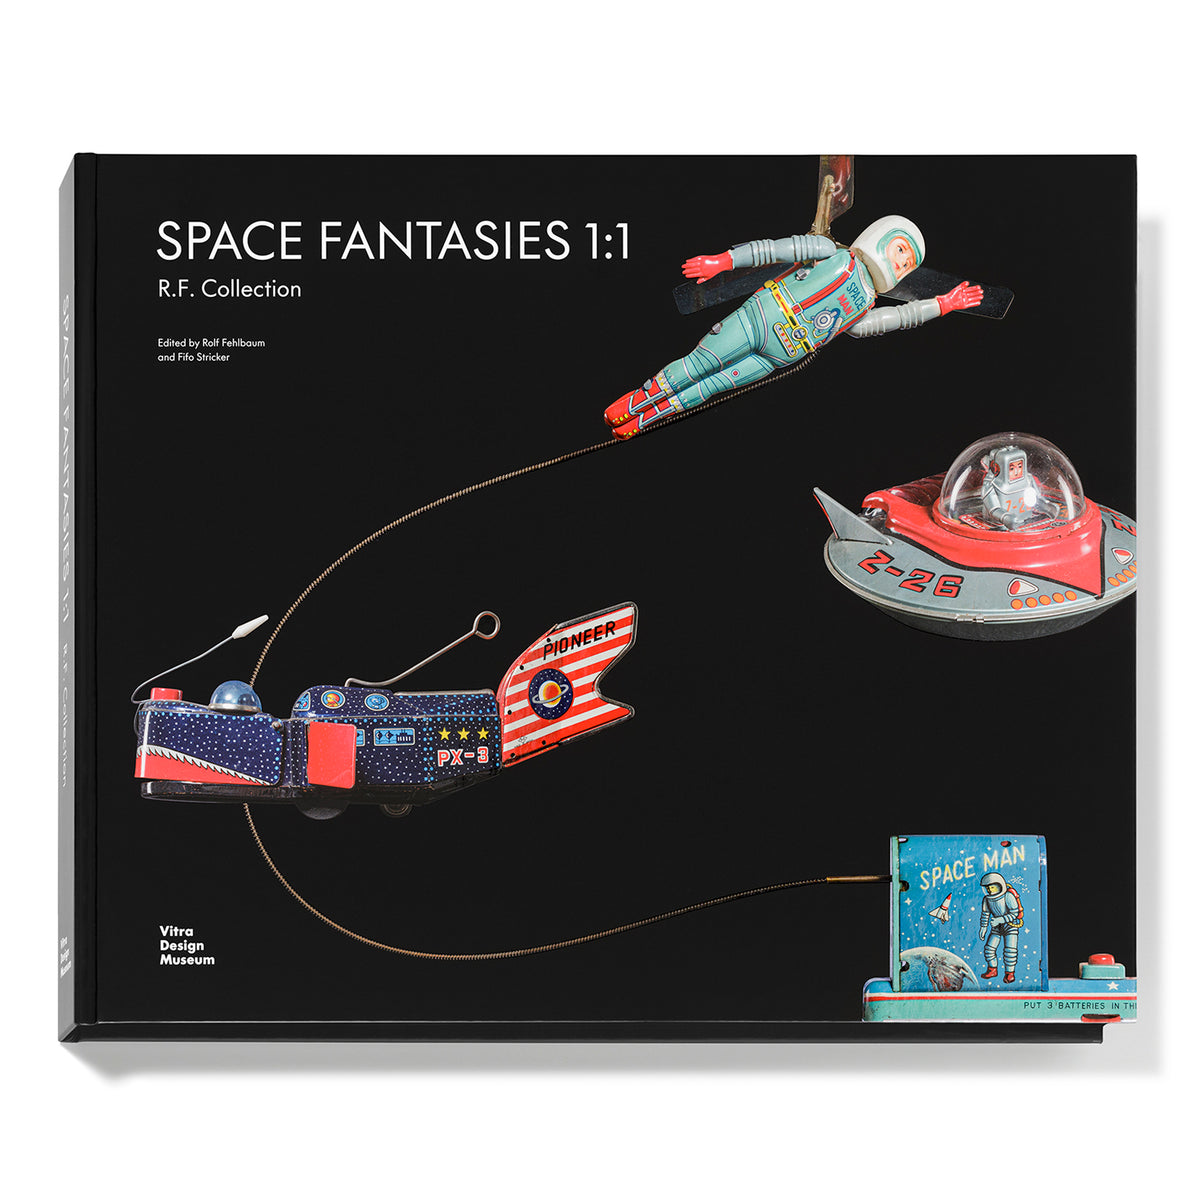 Space Fantasies 1:1 - R. F. Collection by Vitra